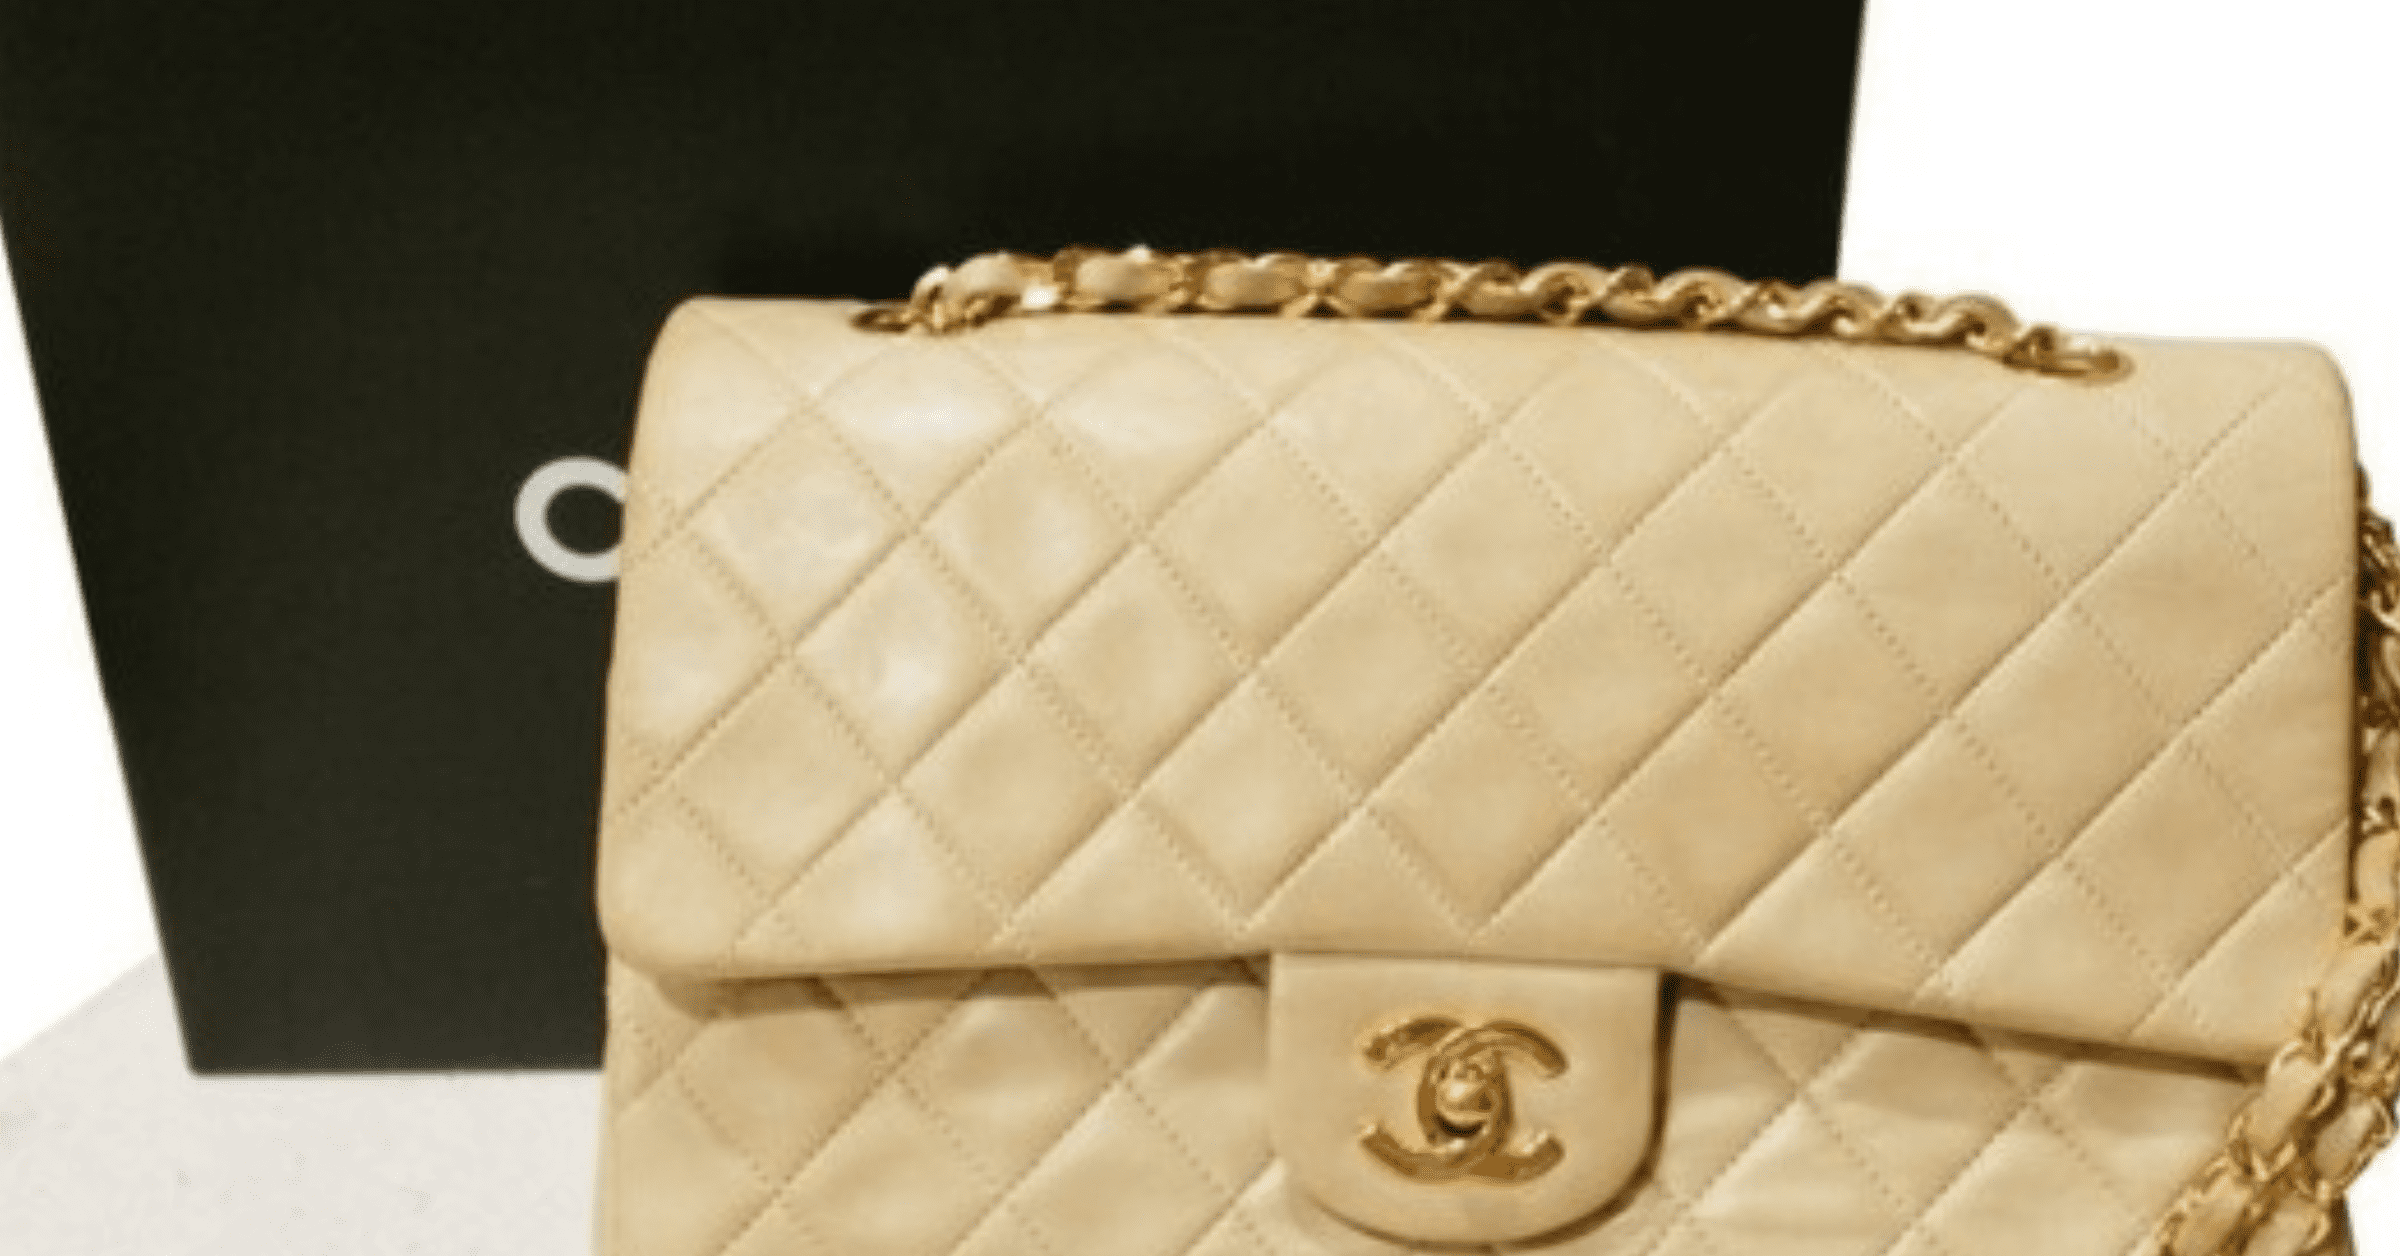 How To Spot Fake Chanel Classic Flap Bag